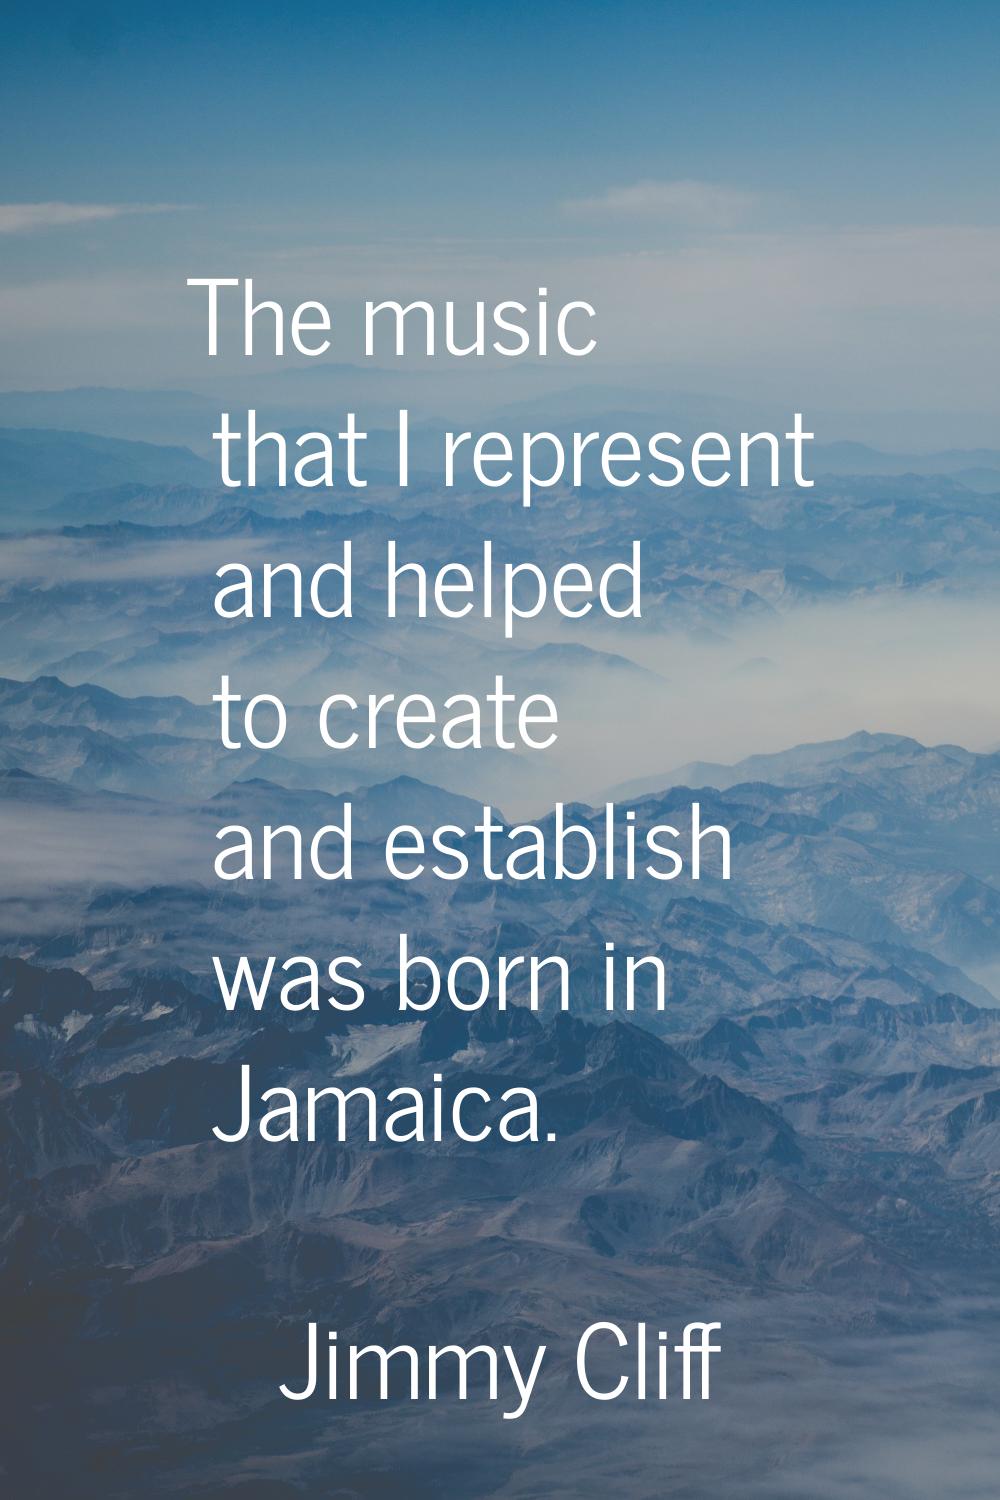 The music that I represent and helped to create and establish was born in Jamaica.